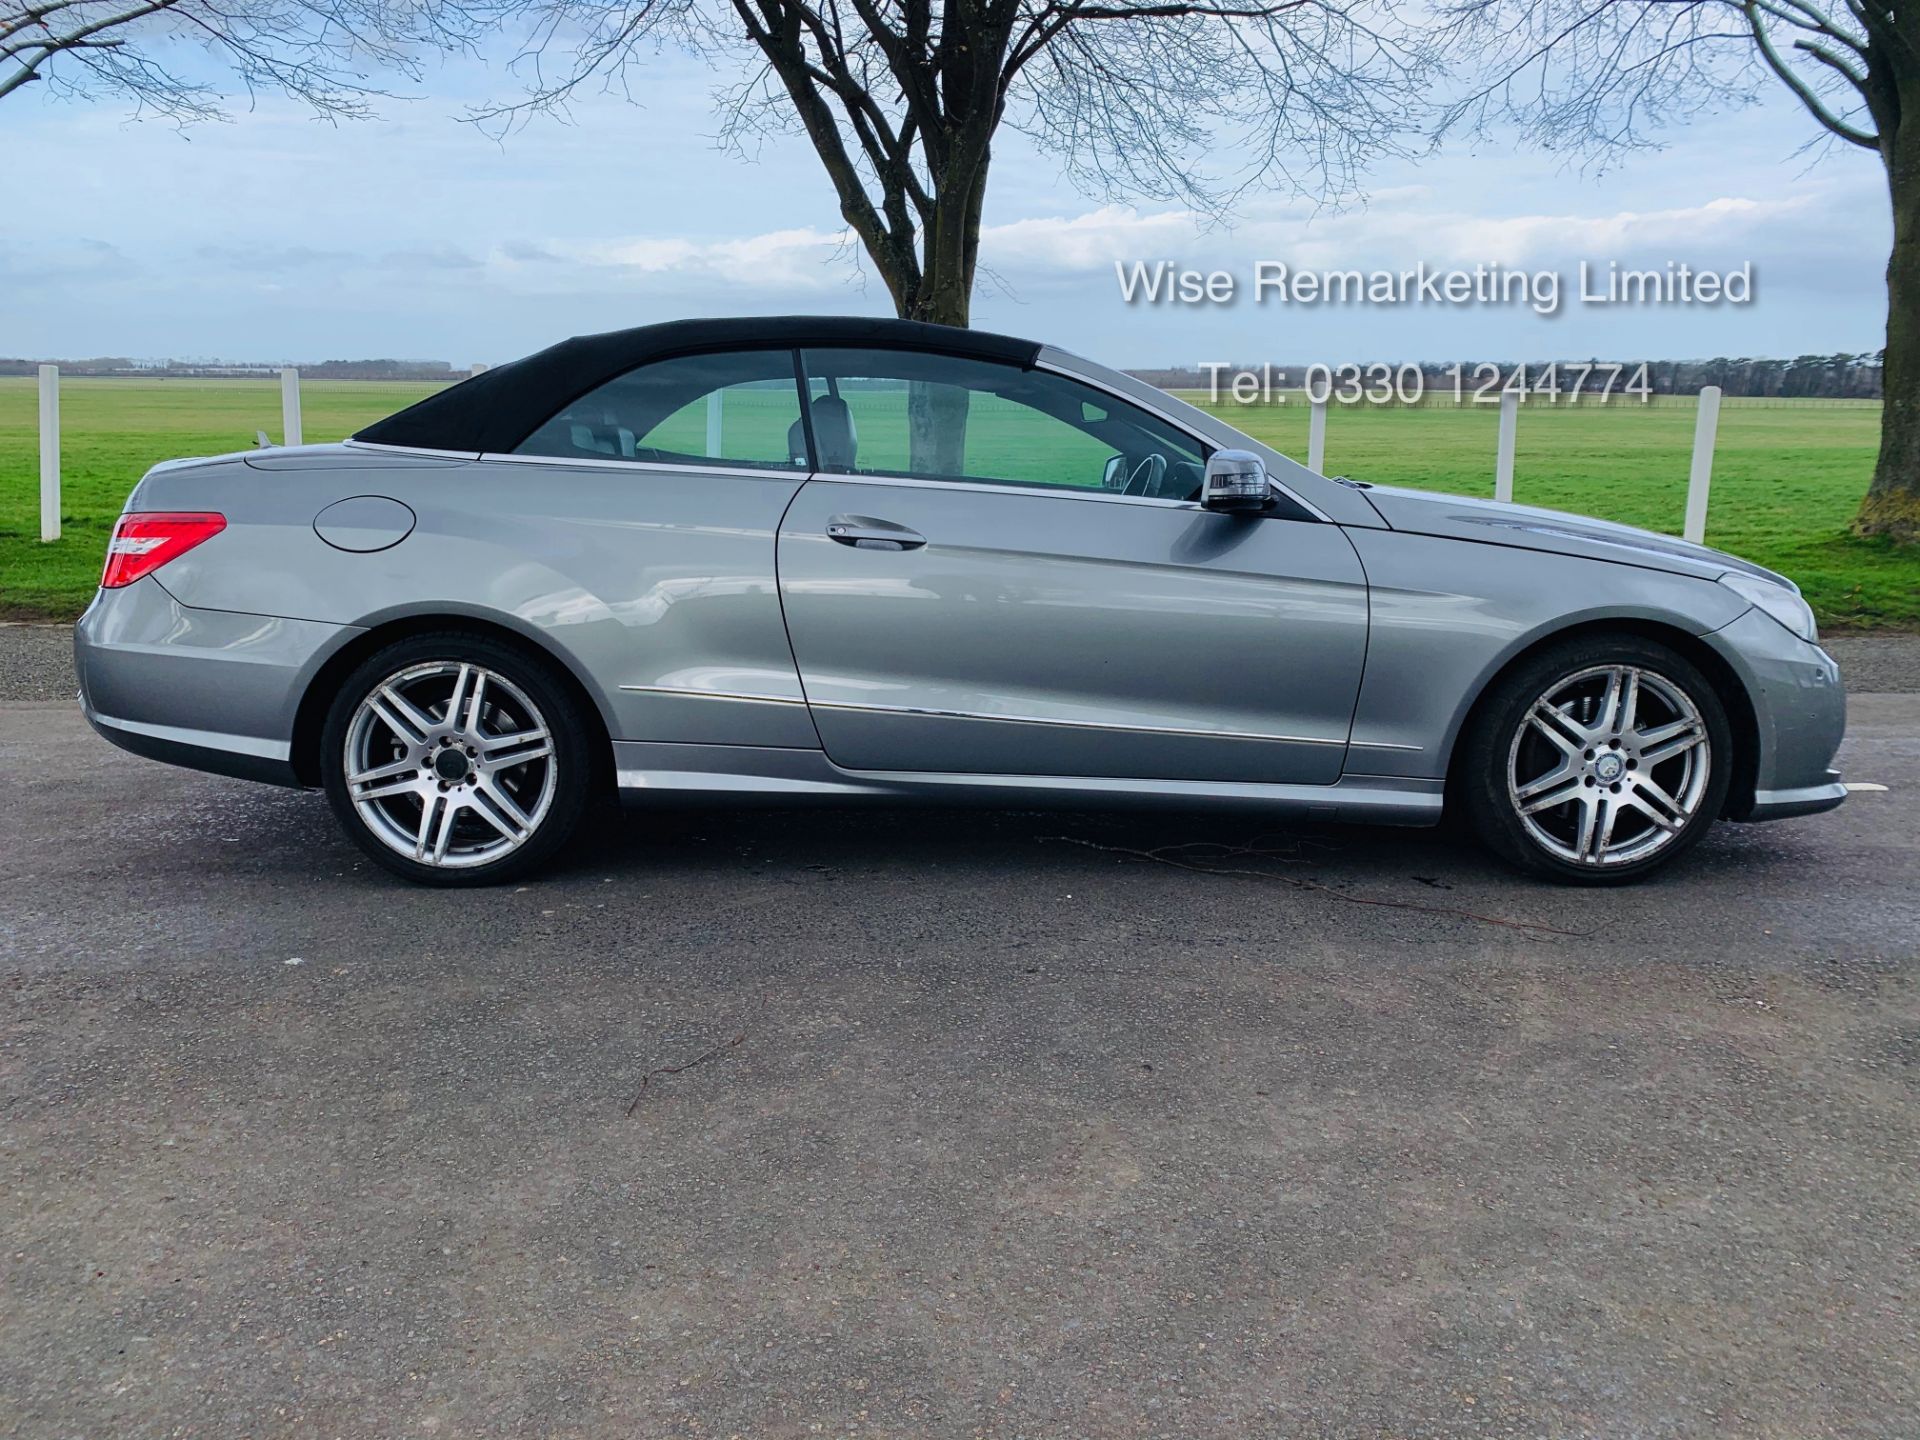 Mercedes E250 CDI Convertible Sport Tip Auto - 2013 Model - Service History - Leather - Parking aid - Image 7 of 27